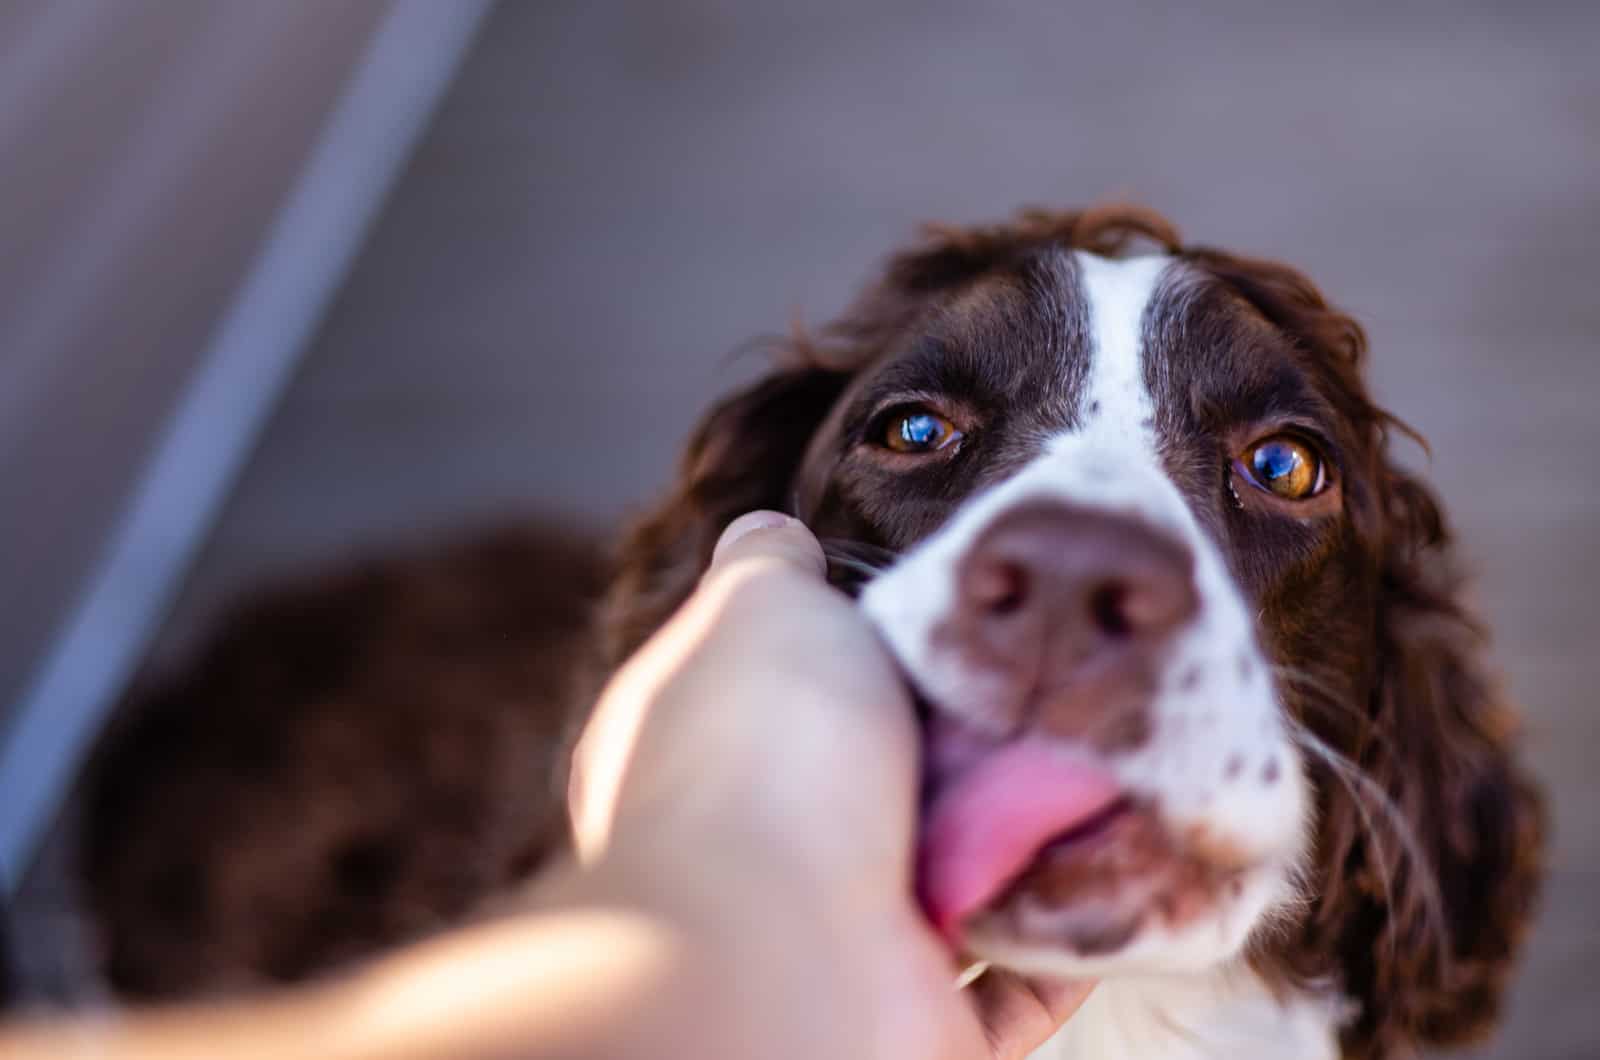 dog licking hand while being petted